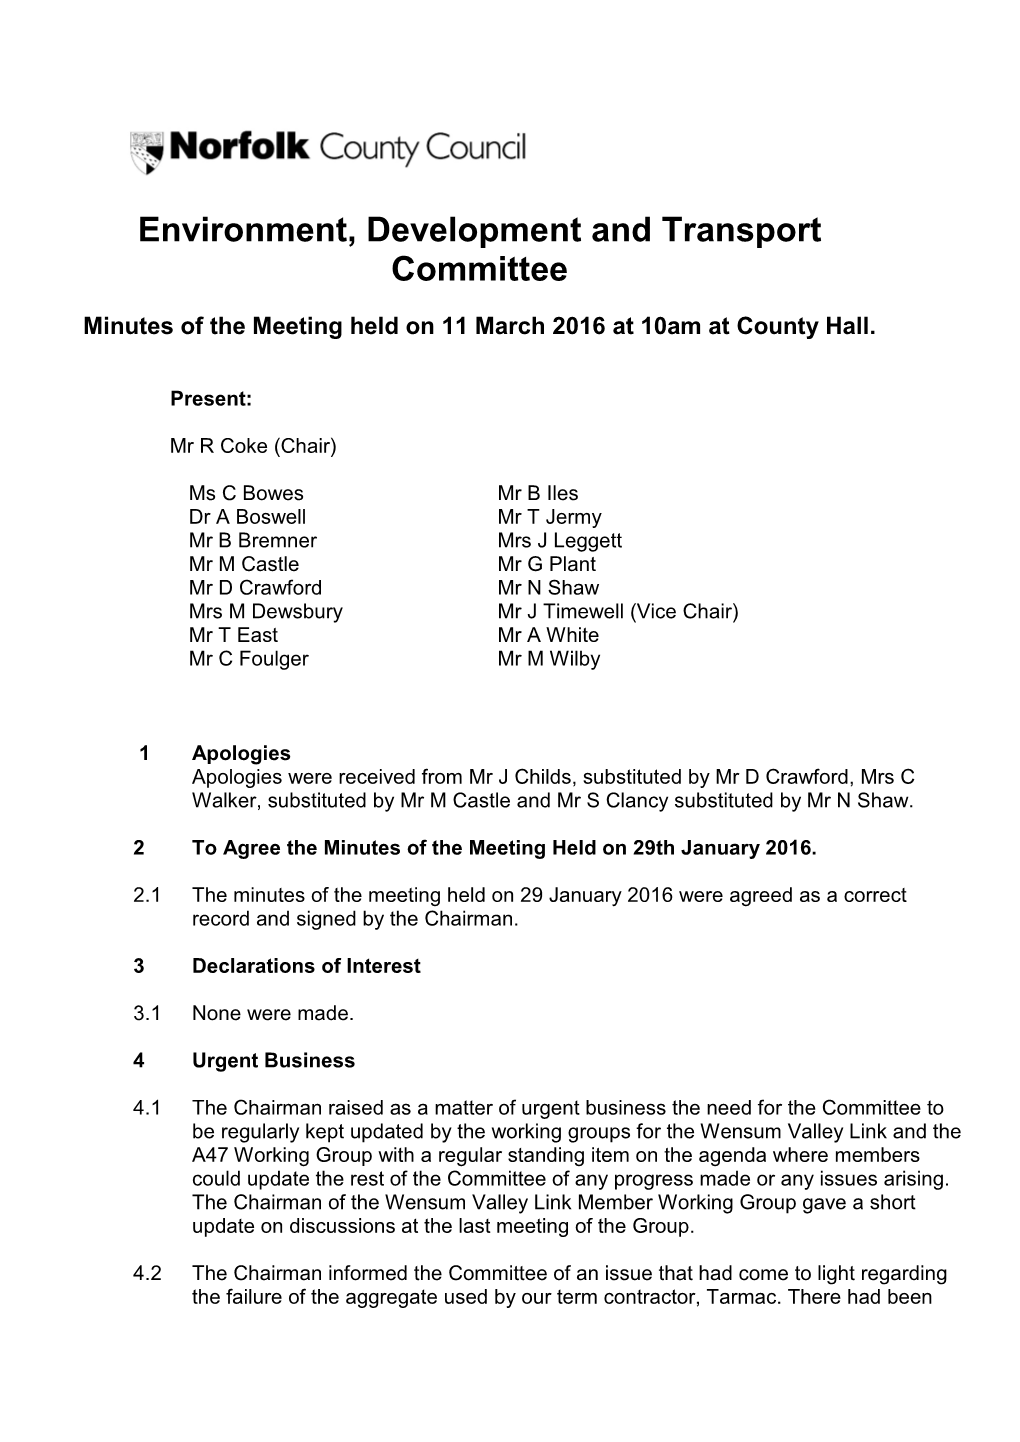 Environment, Development and Transport Committee